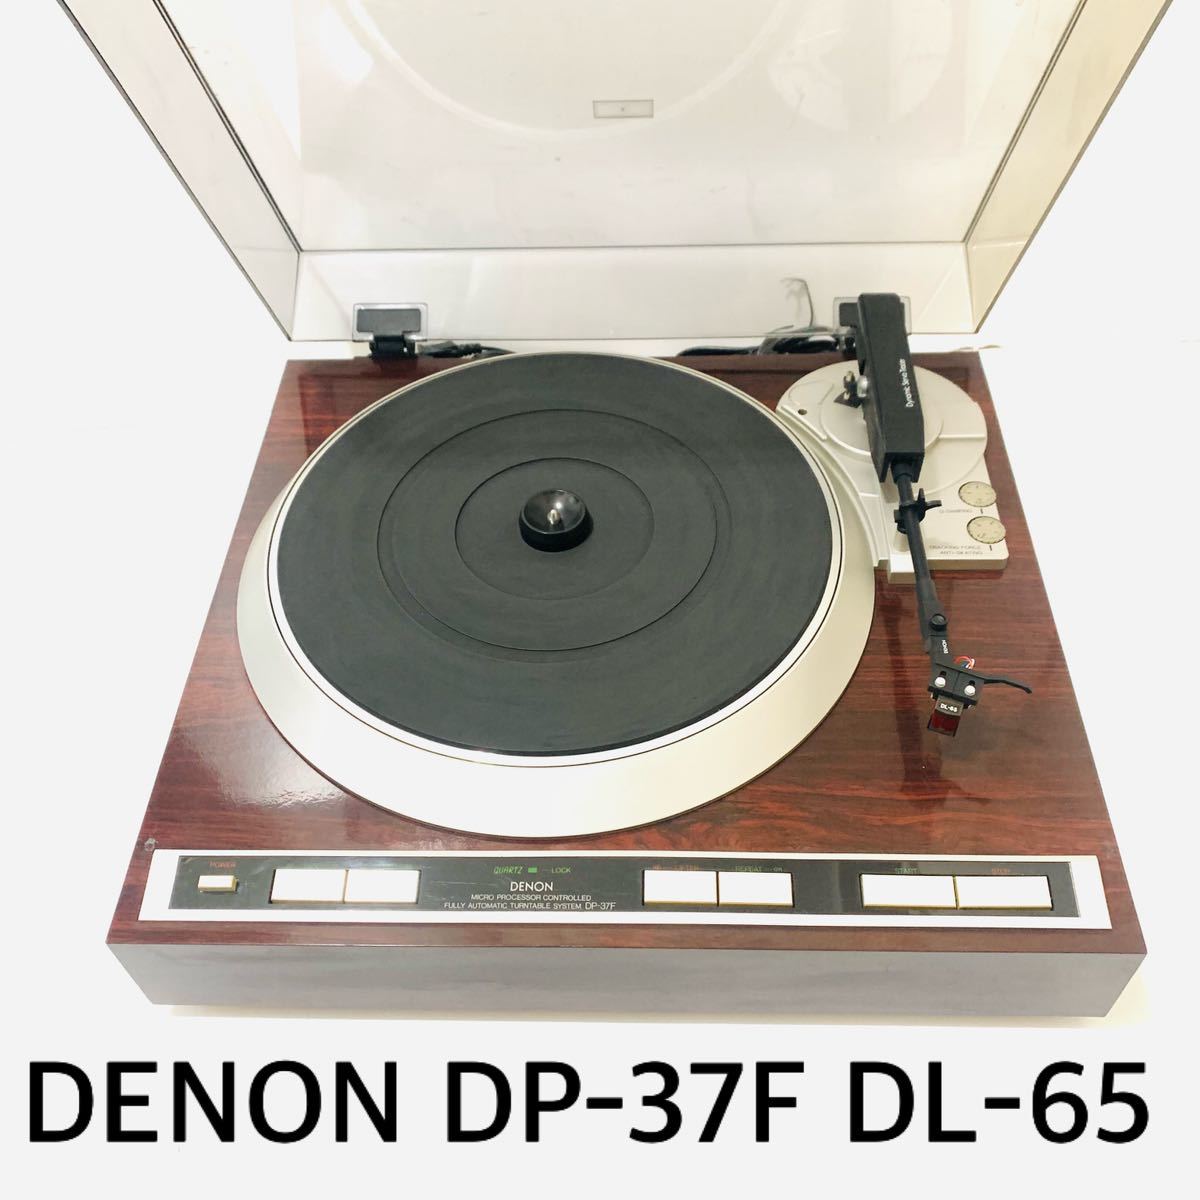 6453 operation excellent DENON DP-37F DL-65 Denon free shipping turntable record player 